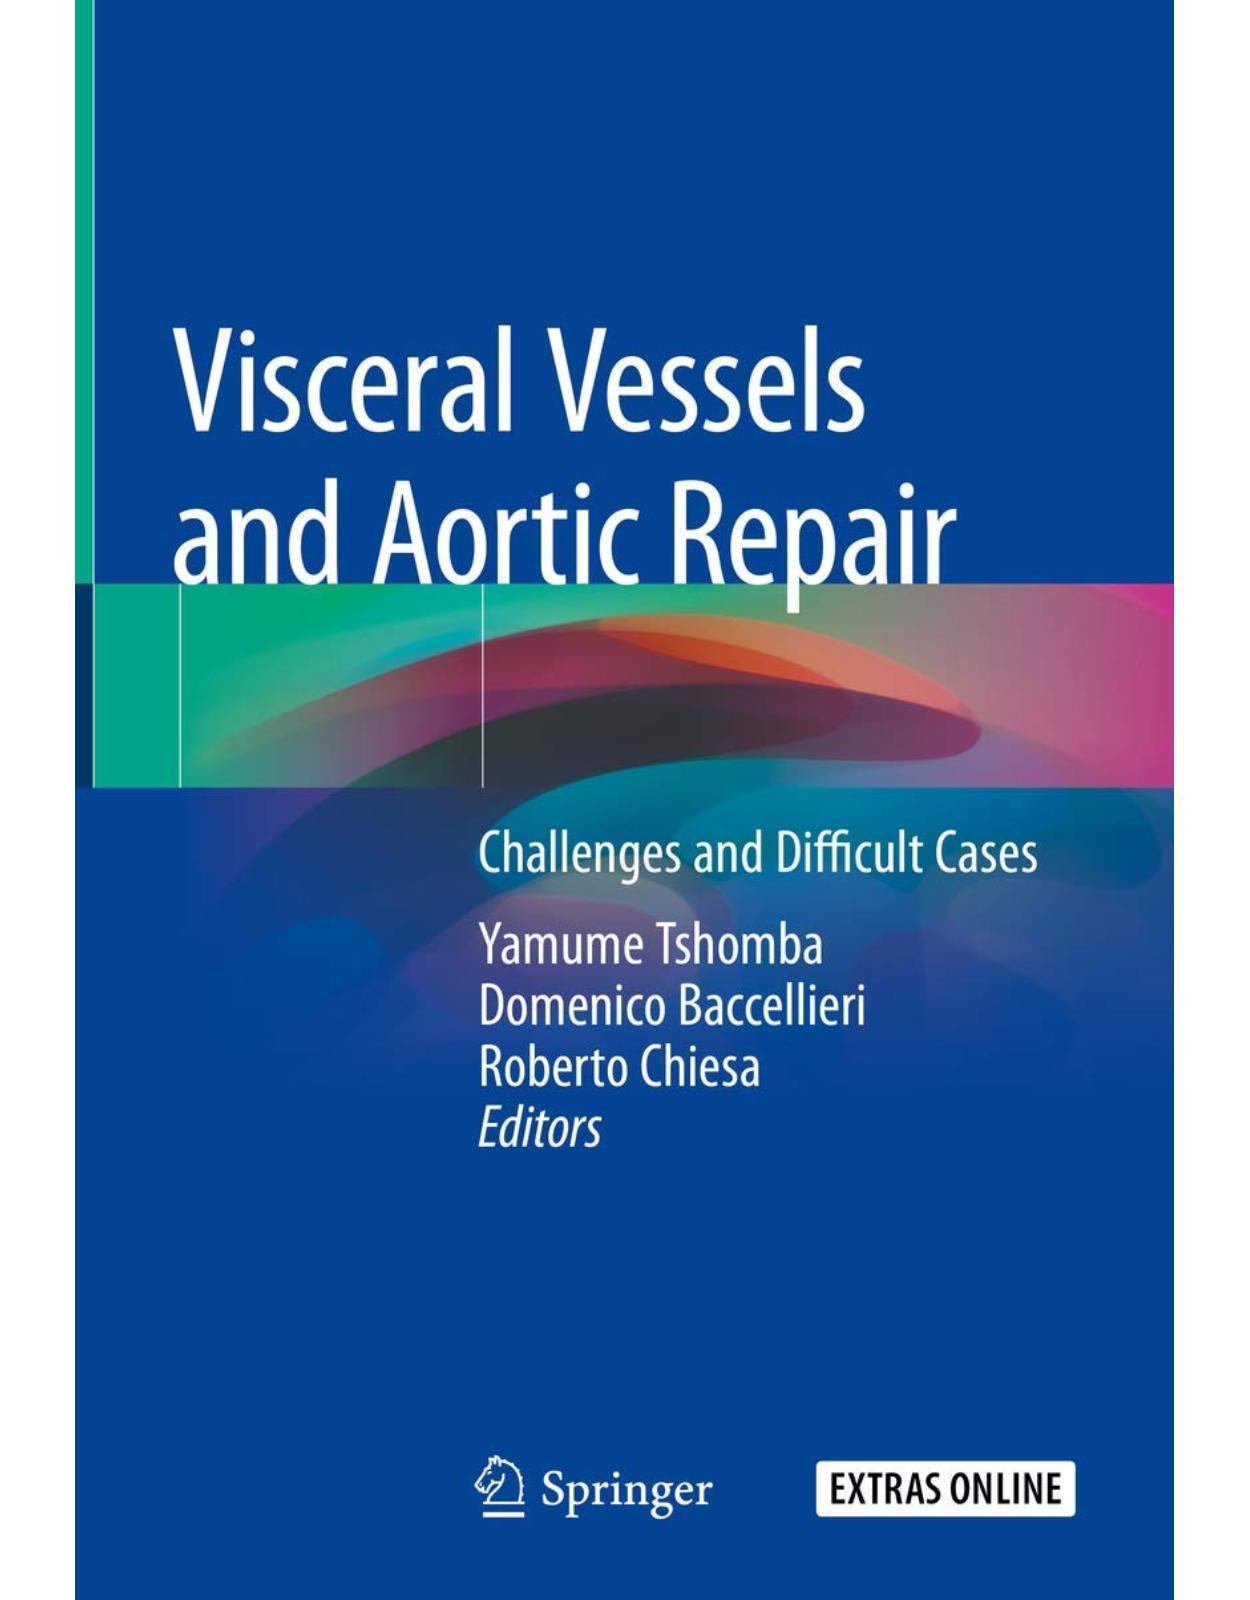 Visceral Vessels and Aortic Repair: Challenges and Difficult Cases 